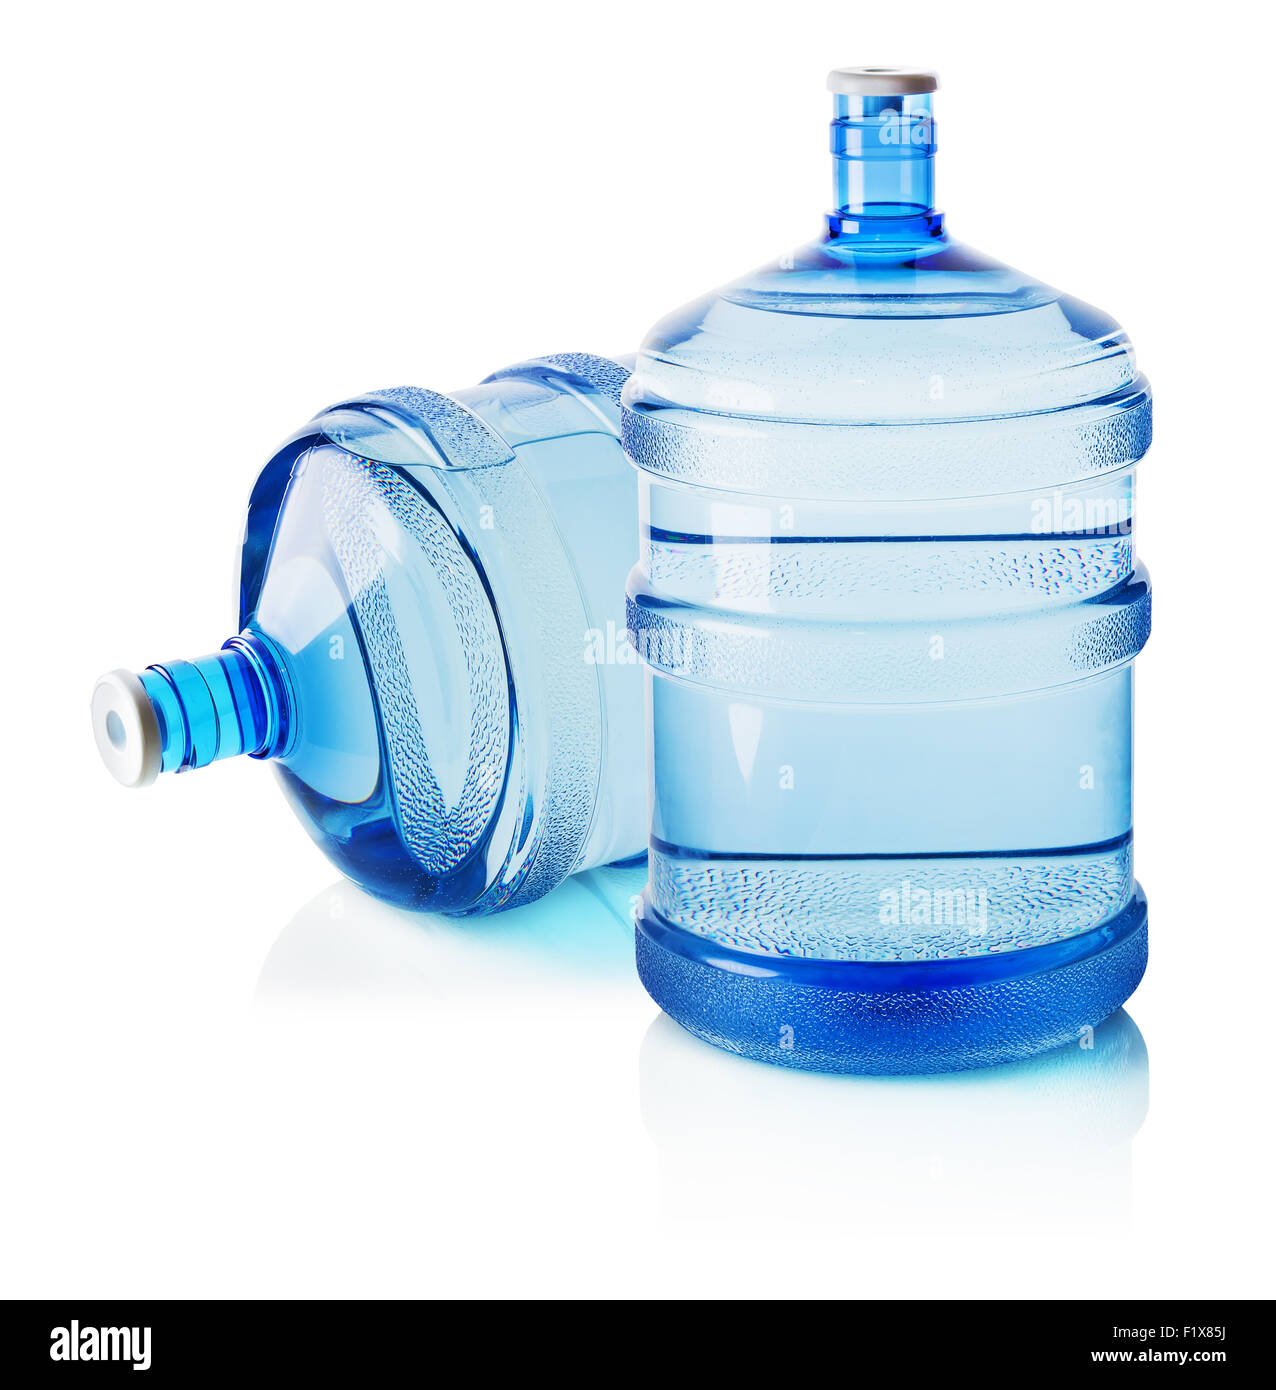 https://c8.alamy.com/comp/F1X85J/two-big-bottles-of-water-isolated-on-the-white-background-F1X85J.jpg